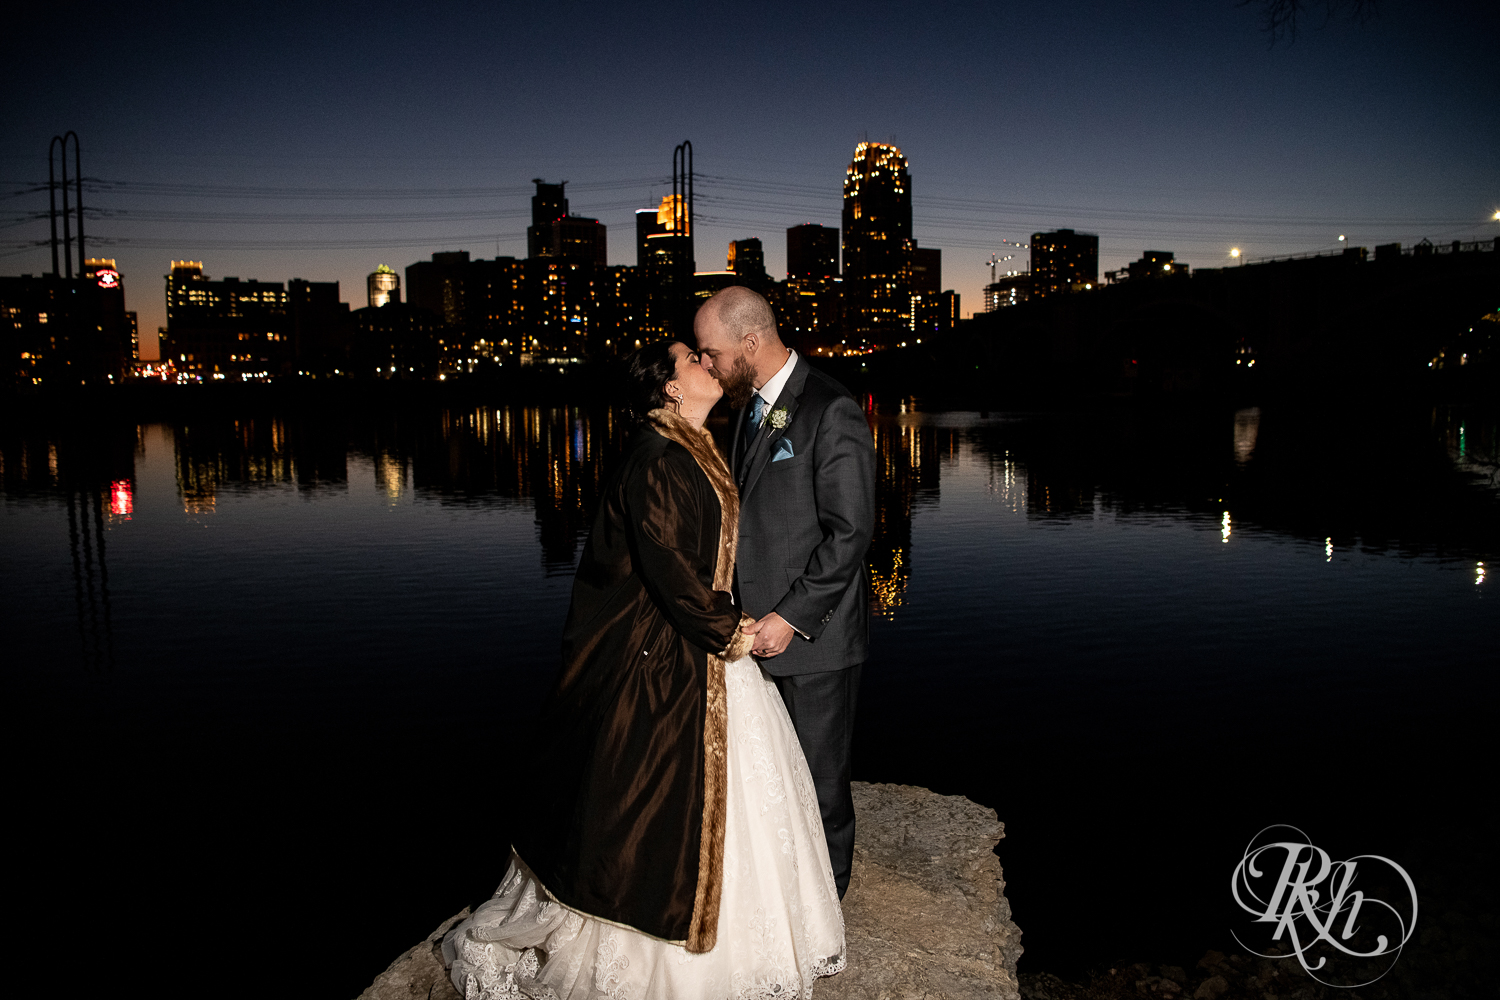 Bride and groom kiss at night in front of city skyline in Minneapolis, Minnesota.